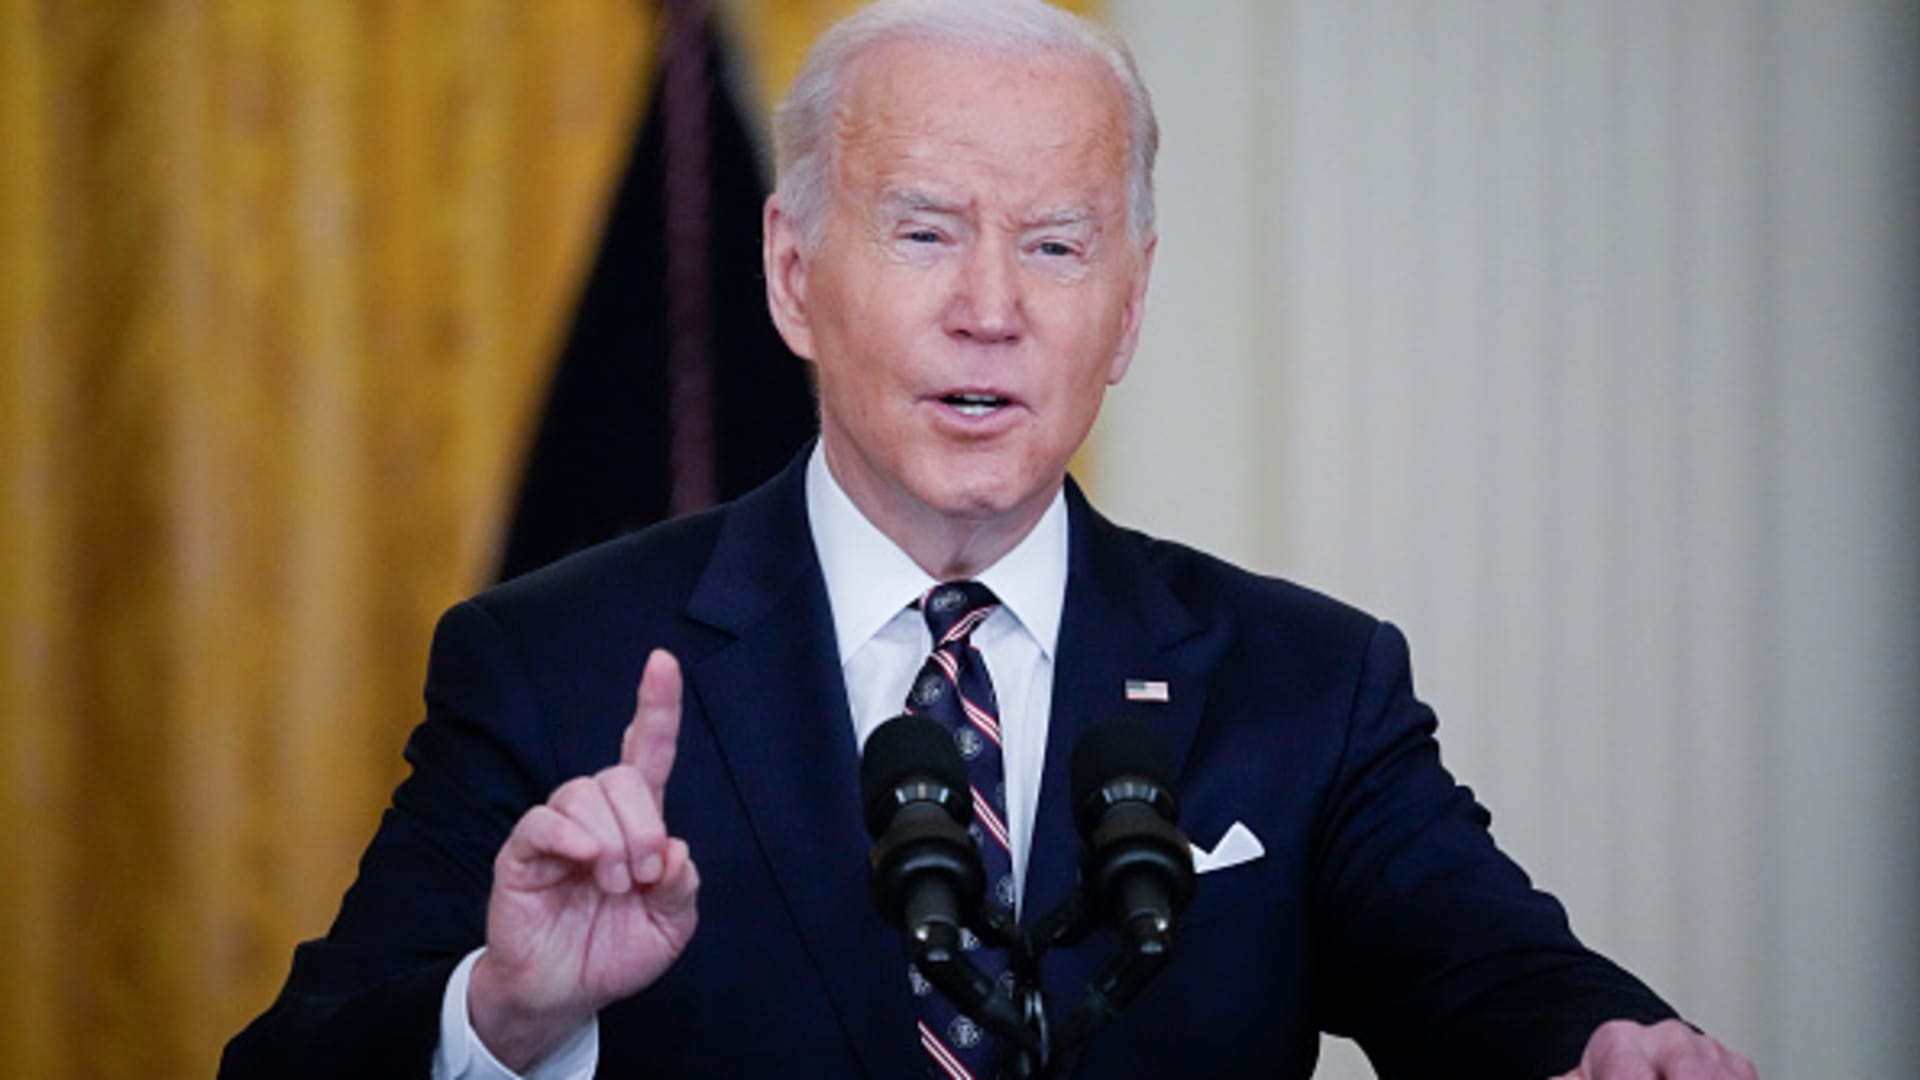 U.S. President Joe Biden speaks on developments in Ukraine and Russia, and announces sanctions against Russia, from the East Room of the White House February 22, 2022 in Washington, DC.